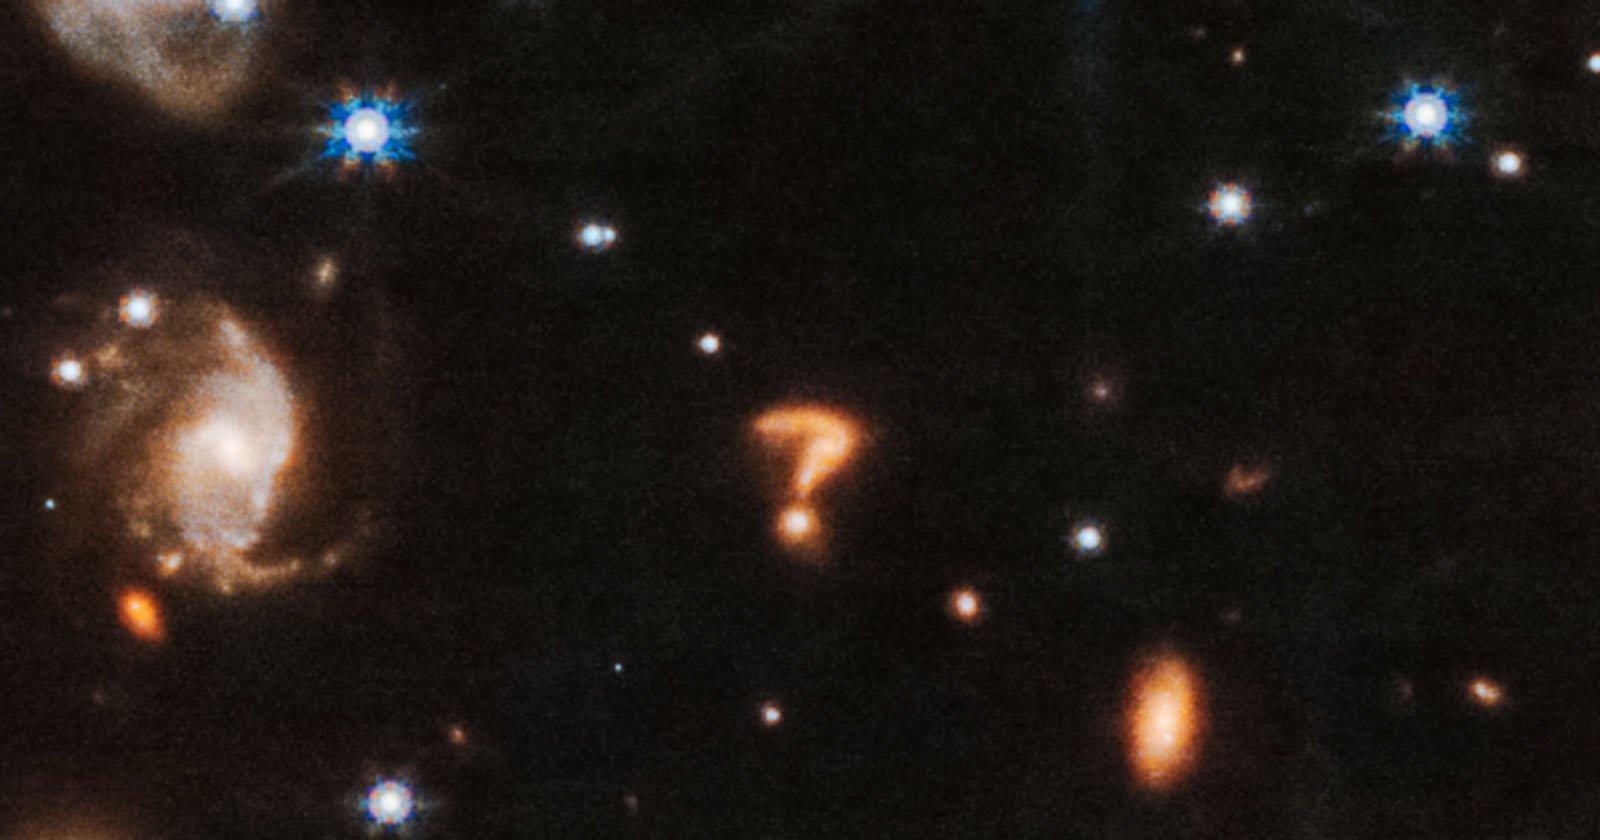 Scientists Explain Cosmic Question Mark That Puzzled the Internet